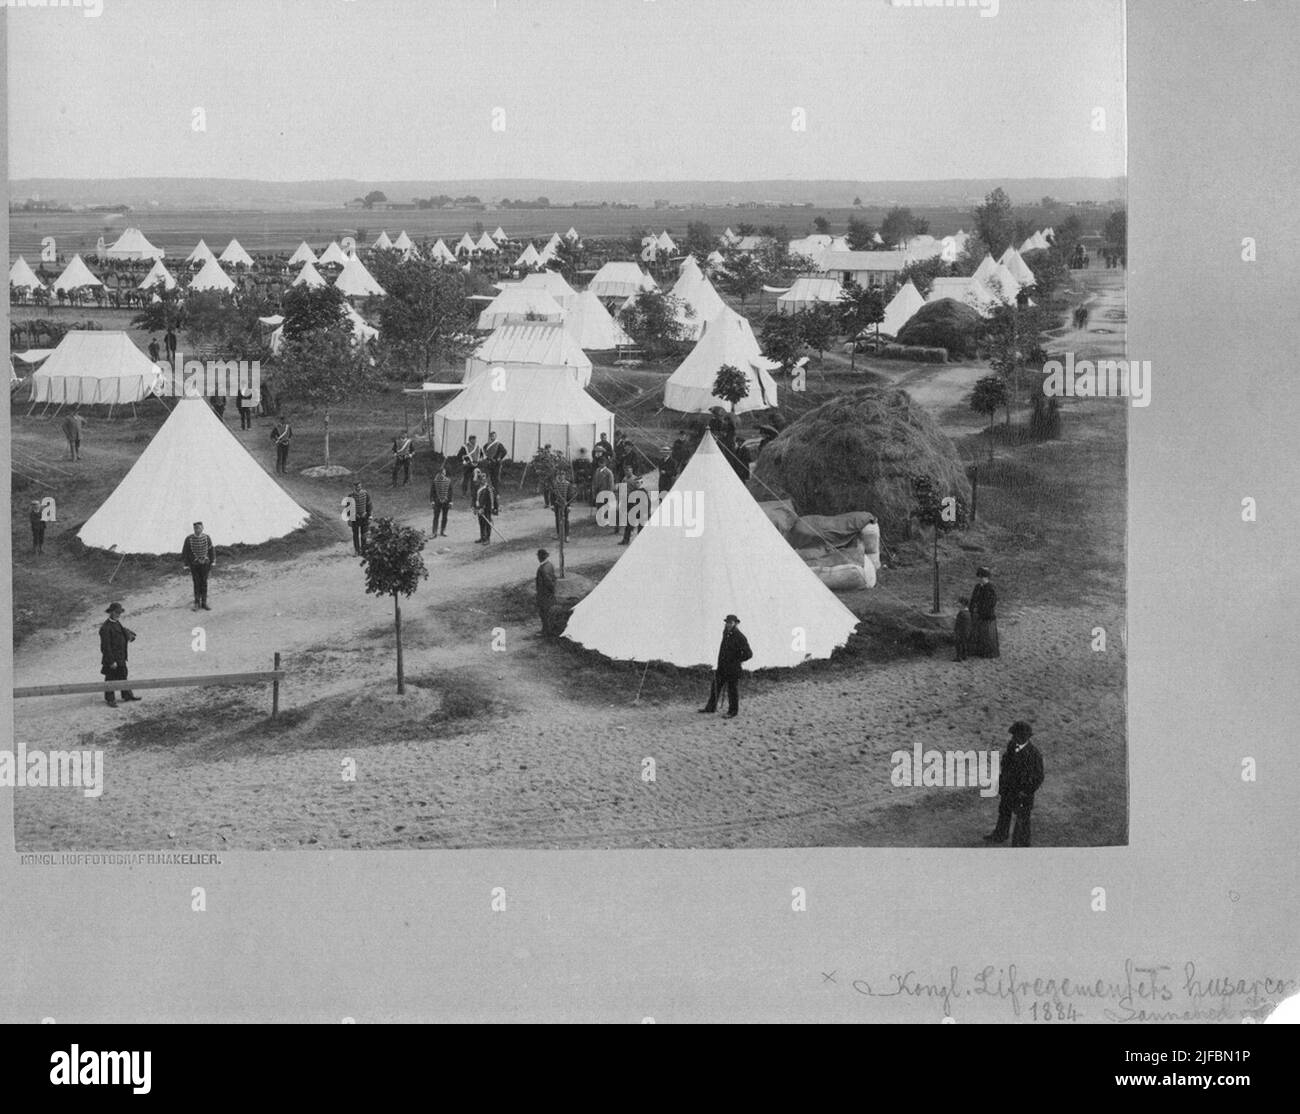 Soldiers from the Life Regiment's Husars K 3 stand outside tent camps at Sanna Hed. Outside some tents are large hay bales. Civil people are visiting the camp. Soldiers from the Life Regiment's Husars K 3 stand outside tent camps at Sanna Hed. Outside some tents are large hay bales. Civil people are visiting the camp. Stock Photo